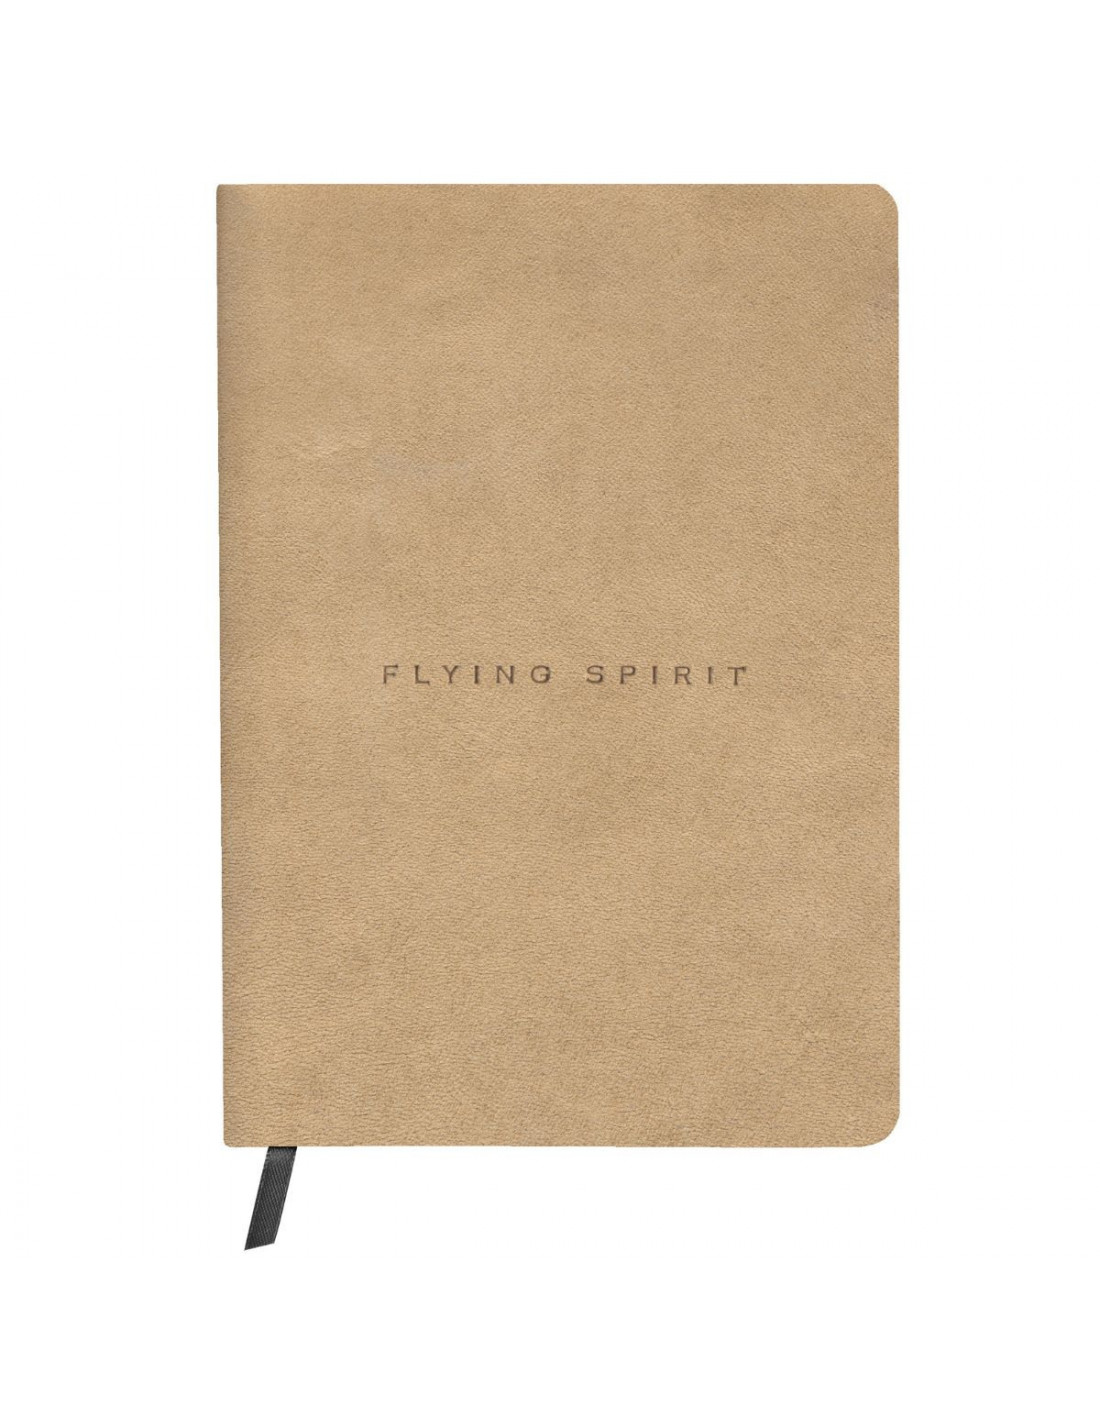 Flying Spirit Leather Collection Notebook - Aged Leather BEIGE - Dotted - Clairefontaine